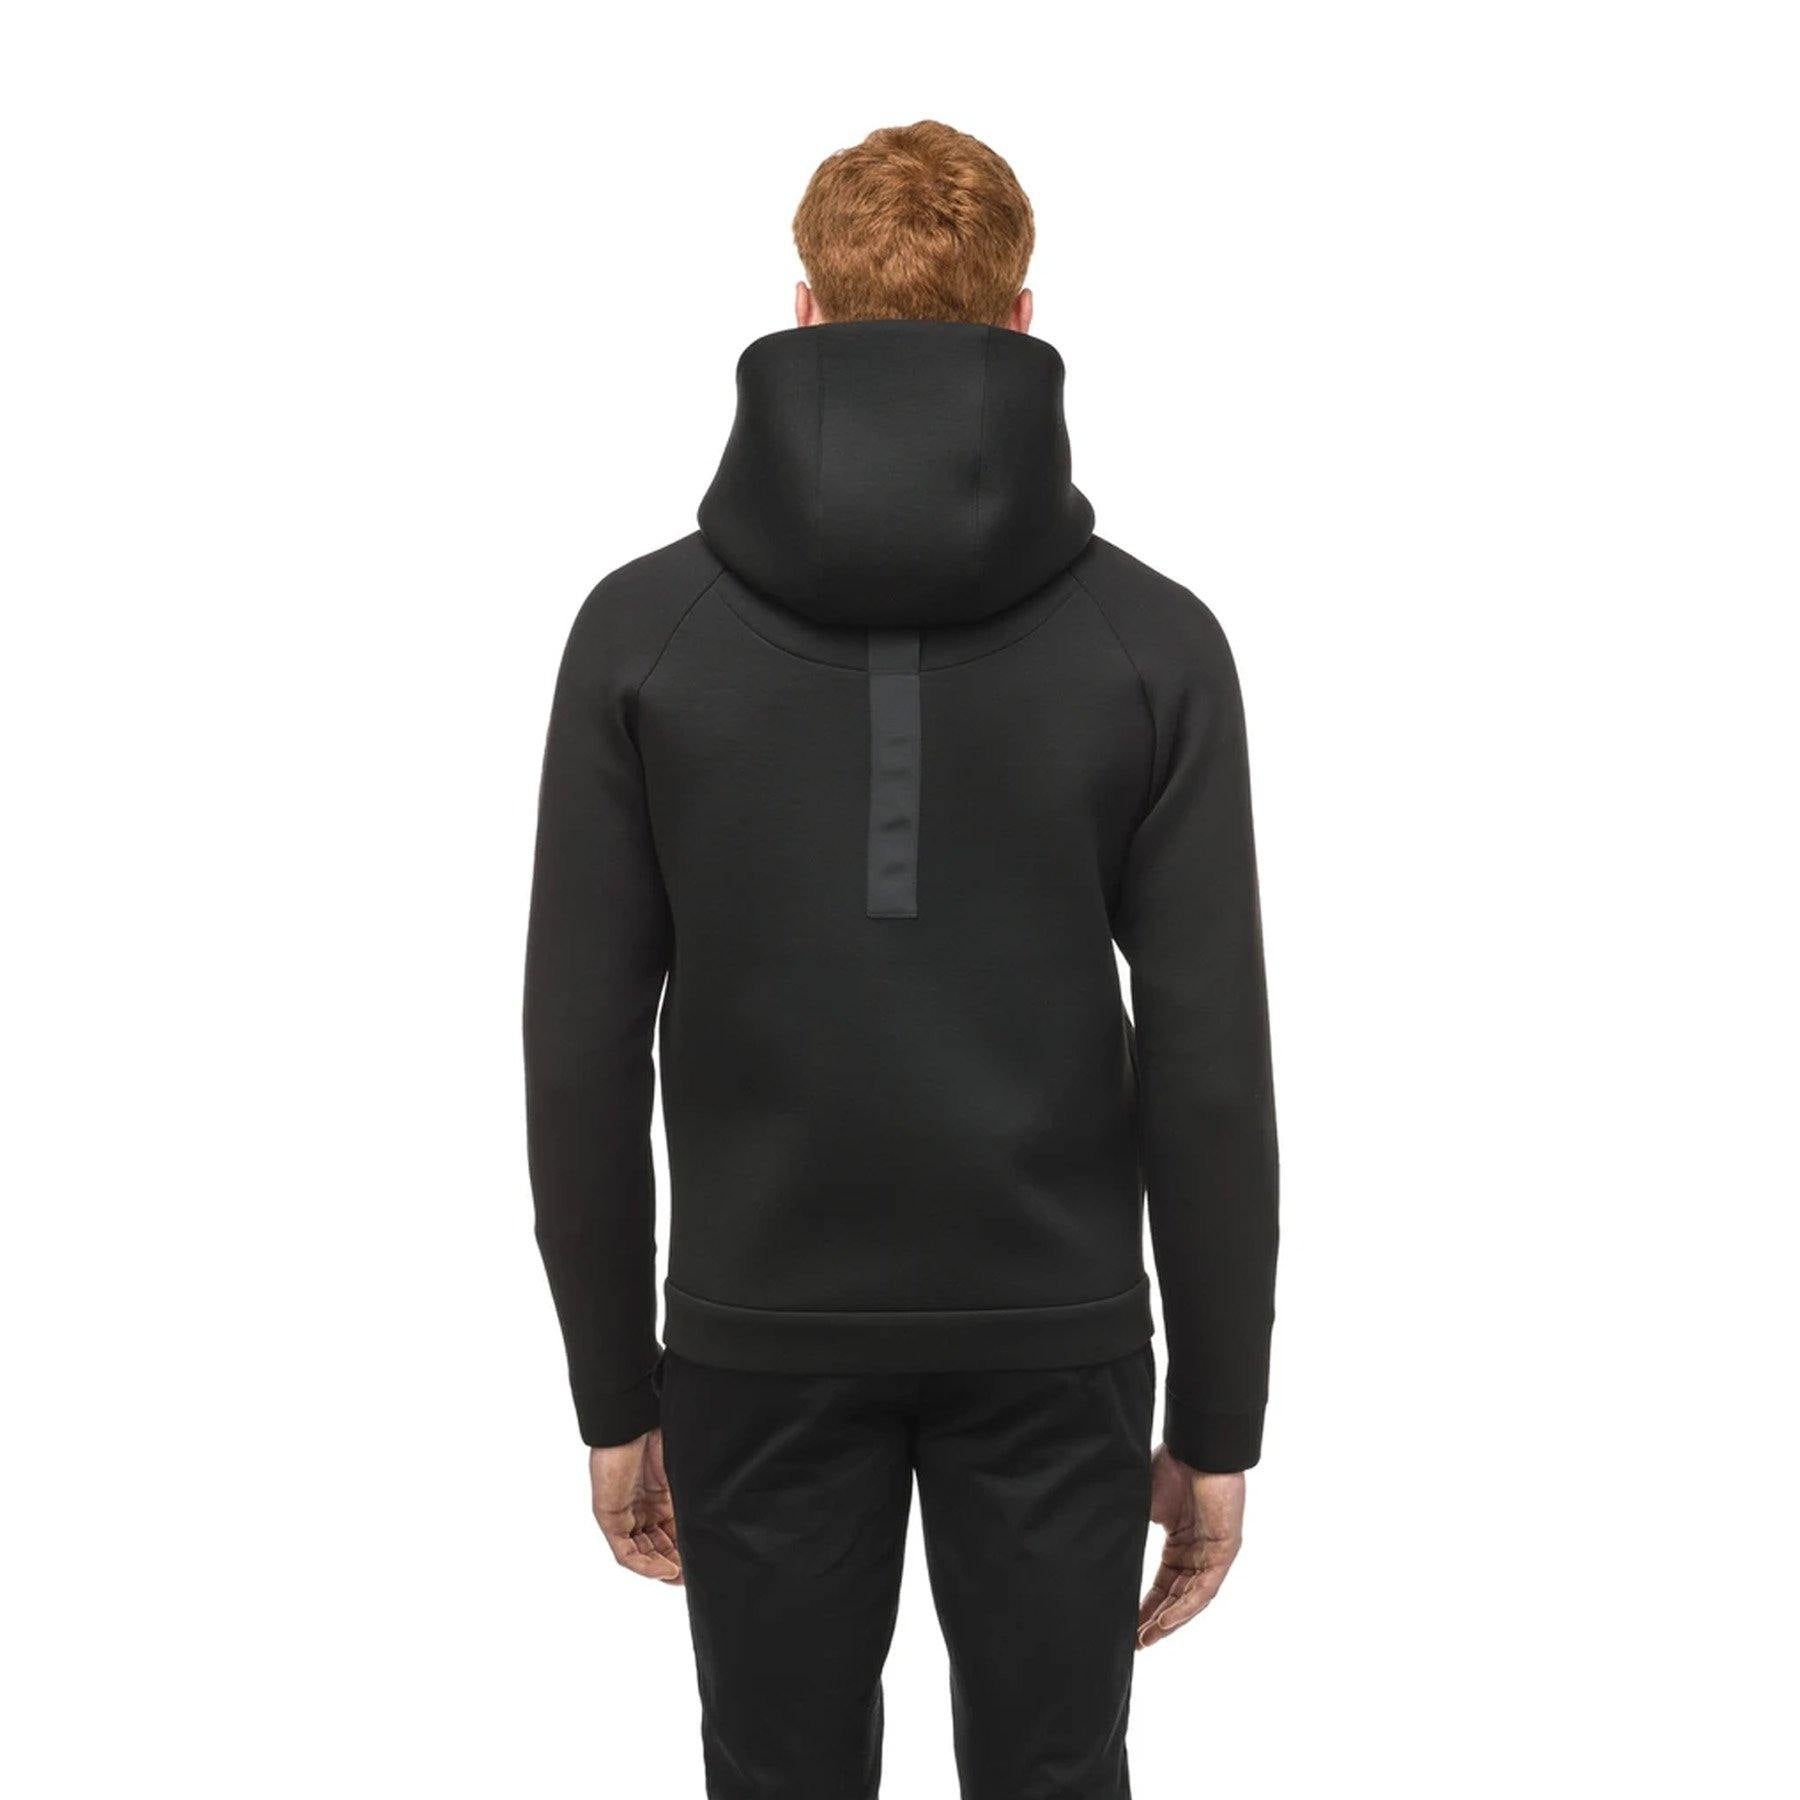 Ian Mens Hoodie - Cosmos Boutique New Jersey